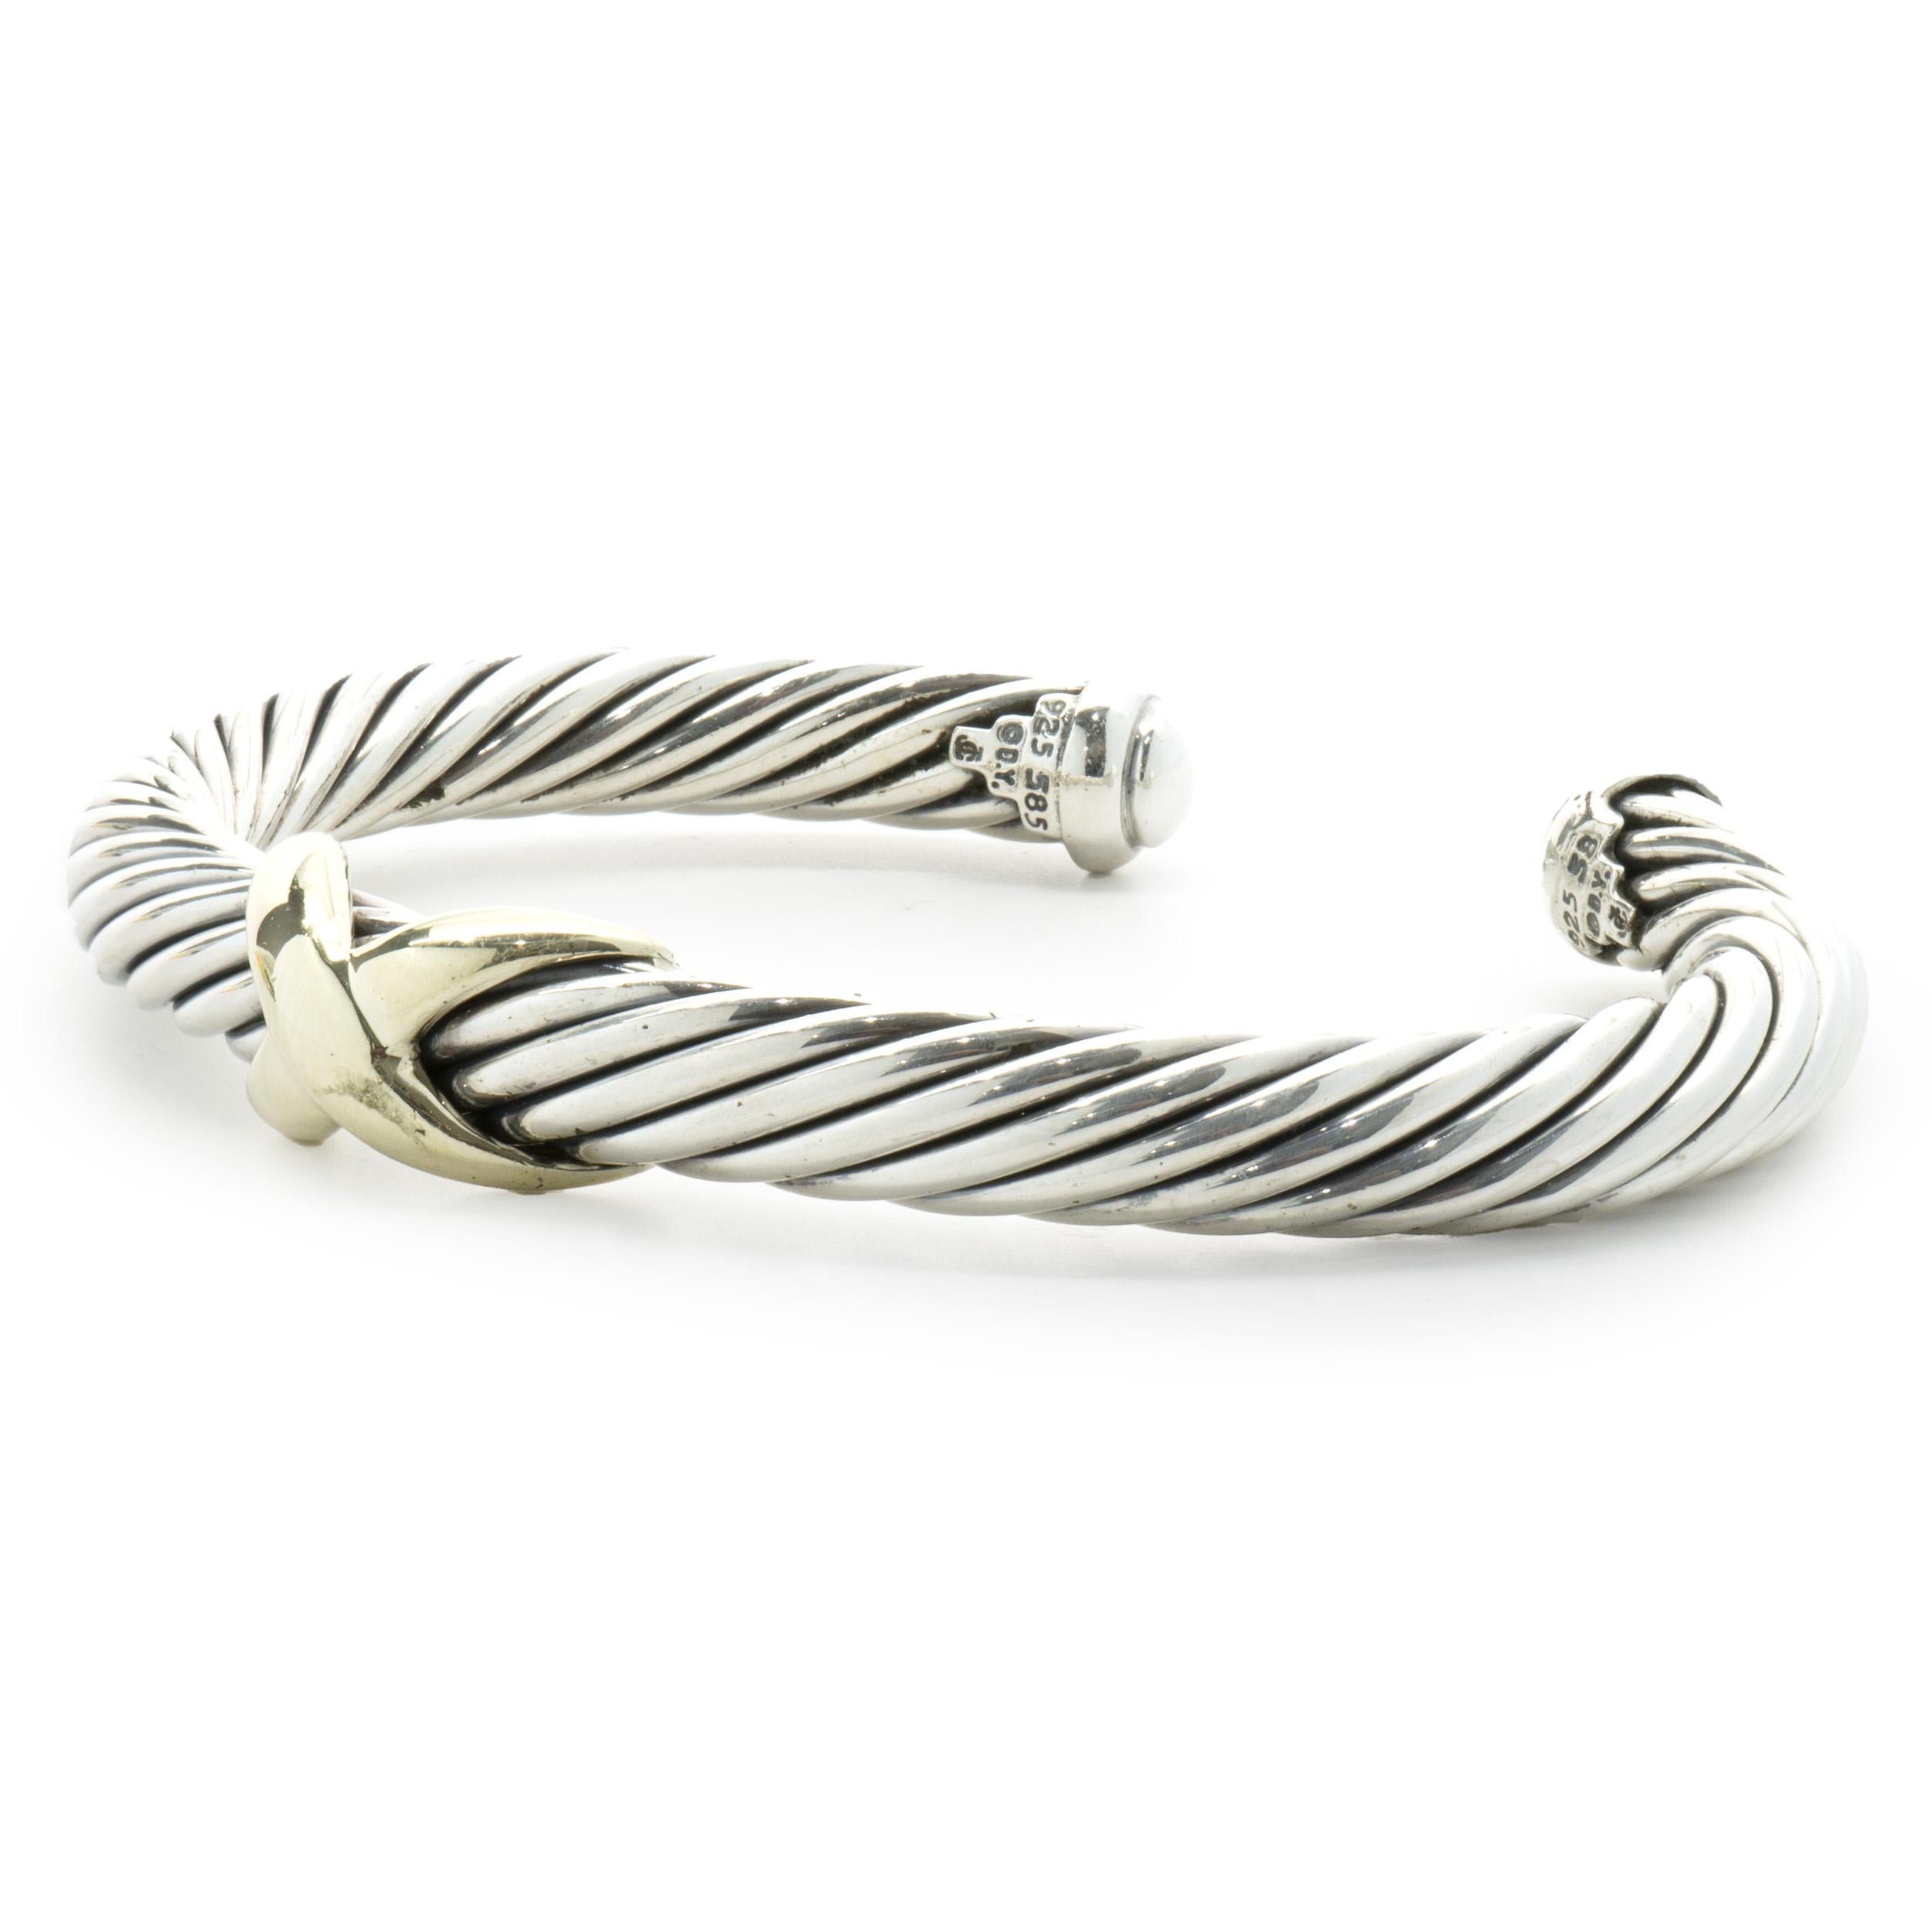 Designer: David Yurman
Material: sterling silver / 14K yellow gold
Dimensions: bracelet will fit a 7-inch wrist

No box or papers included
Guaranteed authentic by seller